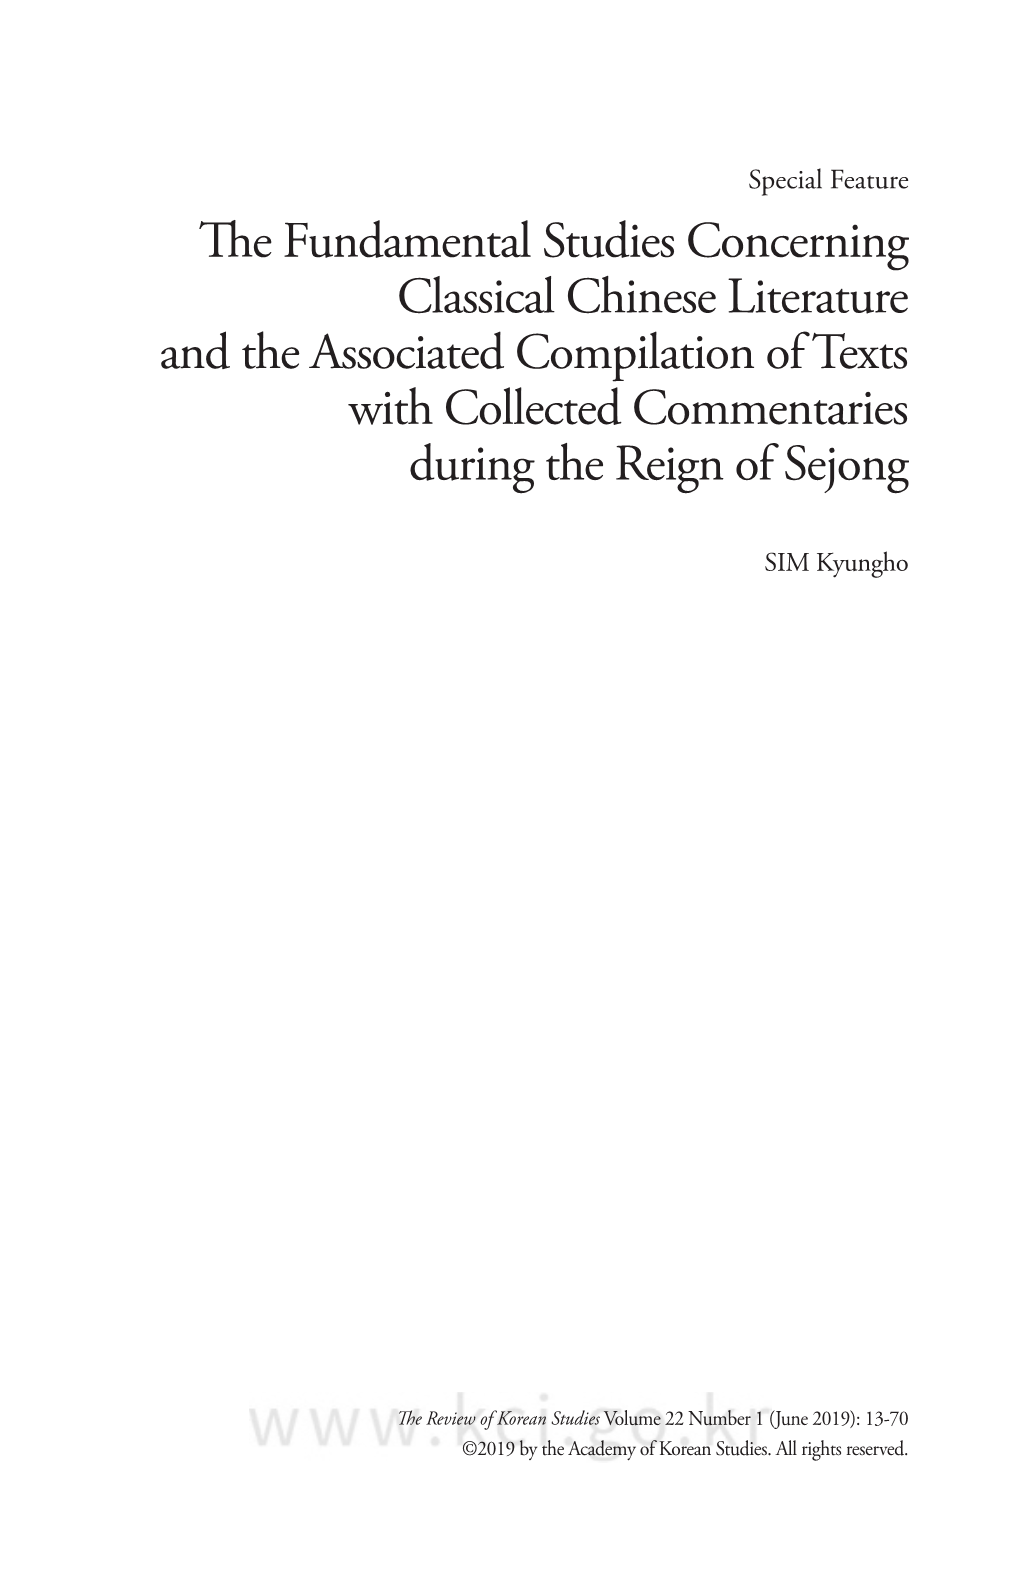 The Fundamental Studies Concerning Classical Chinese Literature and the Associated Compilation of Texts with Collected Commentaries During the Reign of Sejong